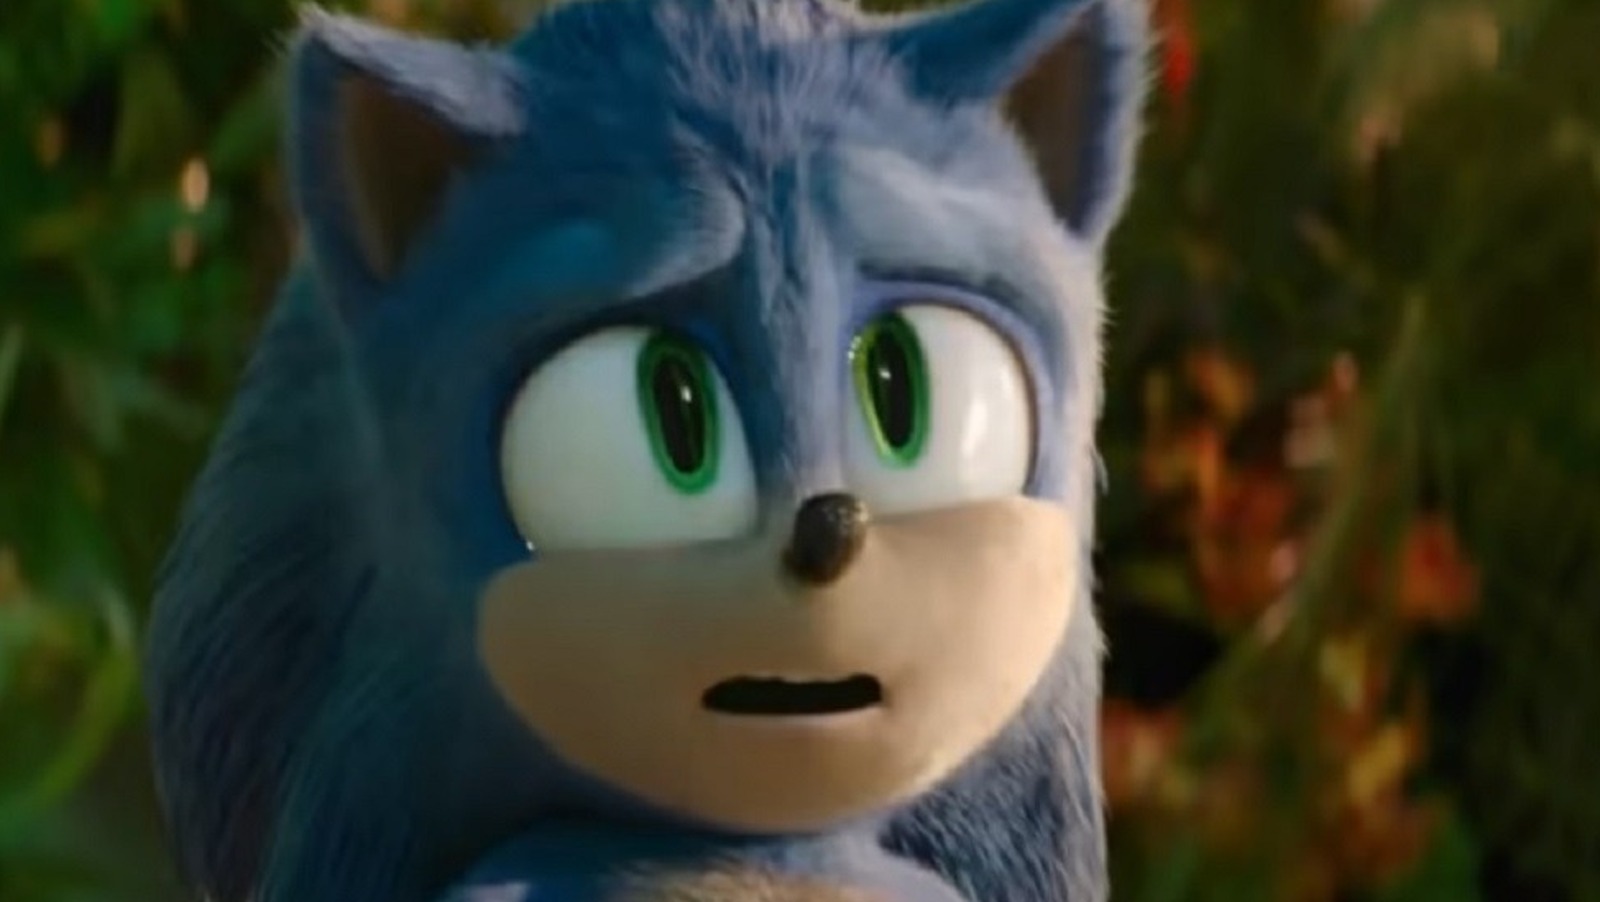 Sonic the Hedgehog 2' Explodes Out of the Box Office Blocks